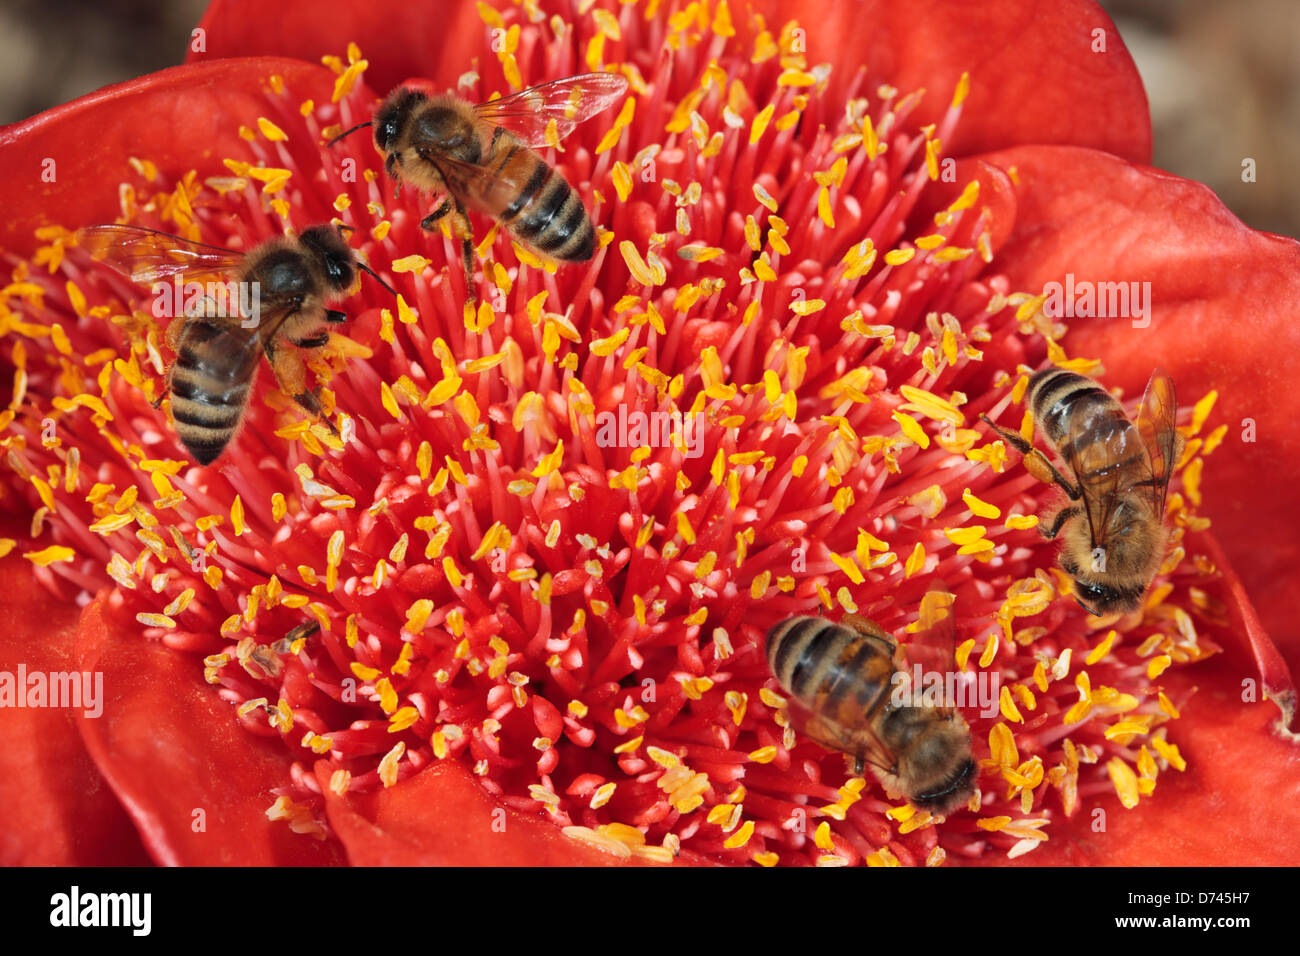 Honey Bees [Apis mellifera -Family Apidae]  collecting pollen from Haemanthus flower- [ Blood Lily - family Amaryllidoideae] Stock Photo